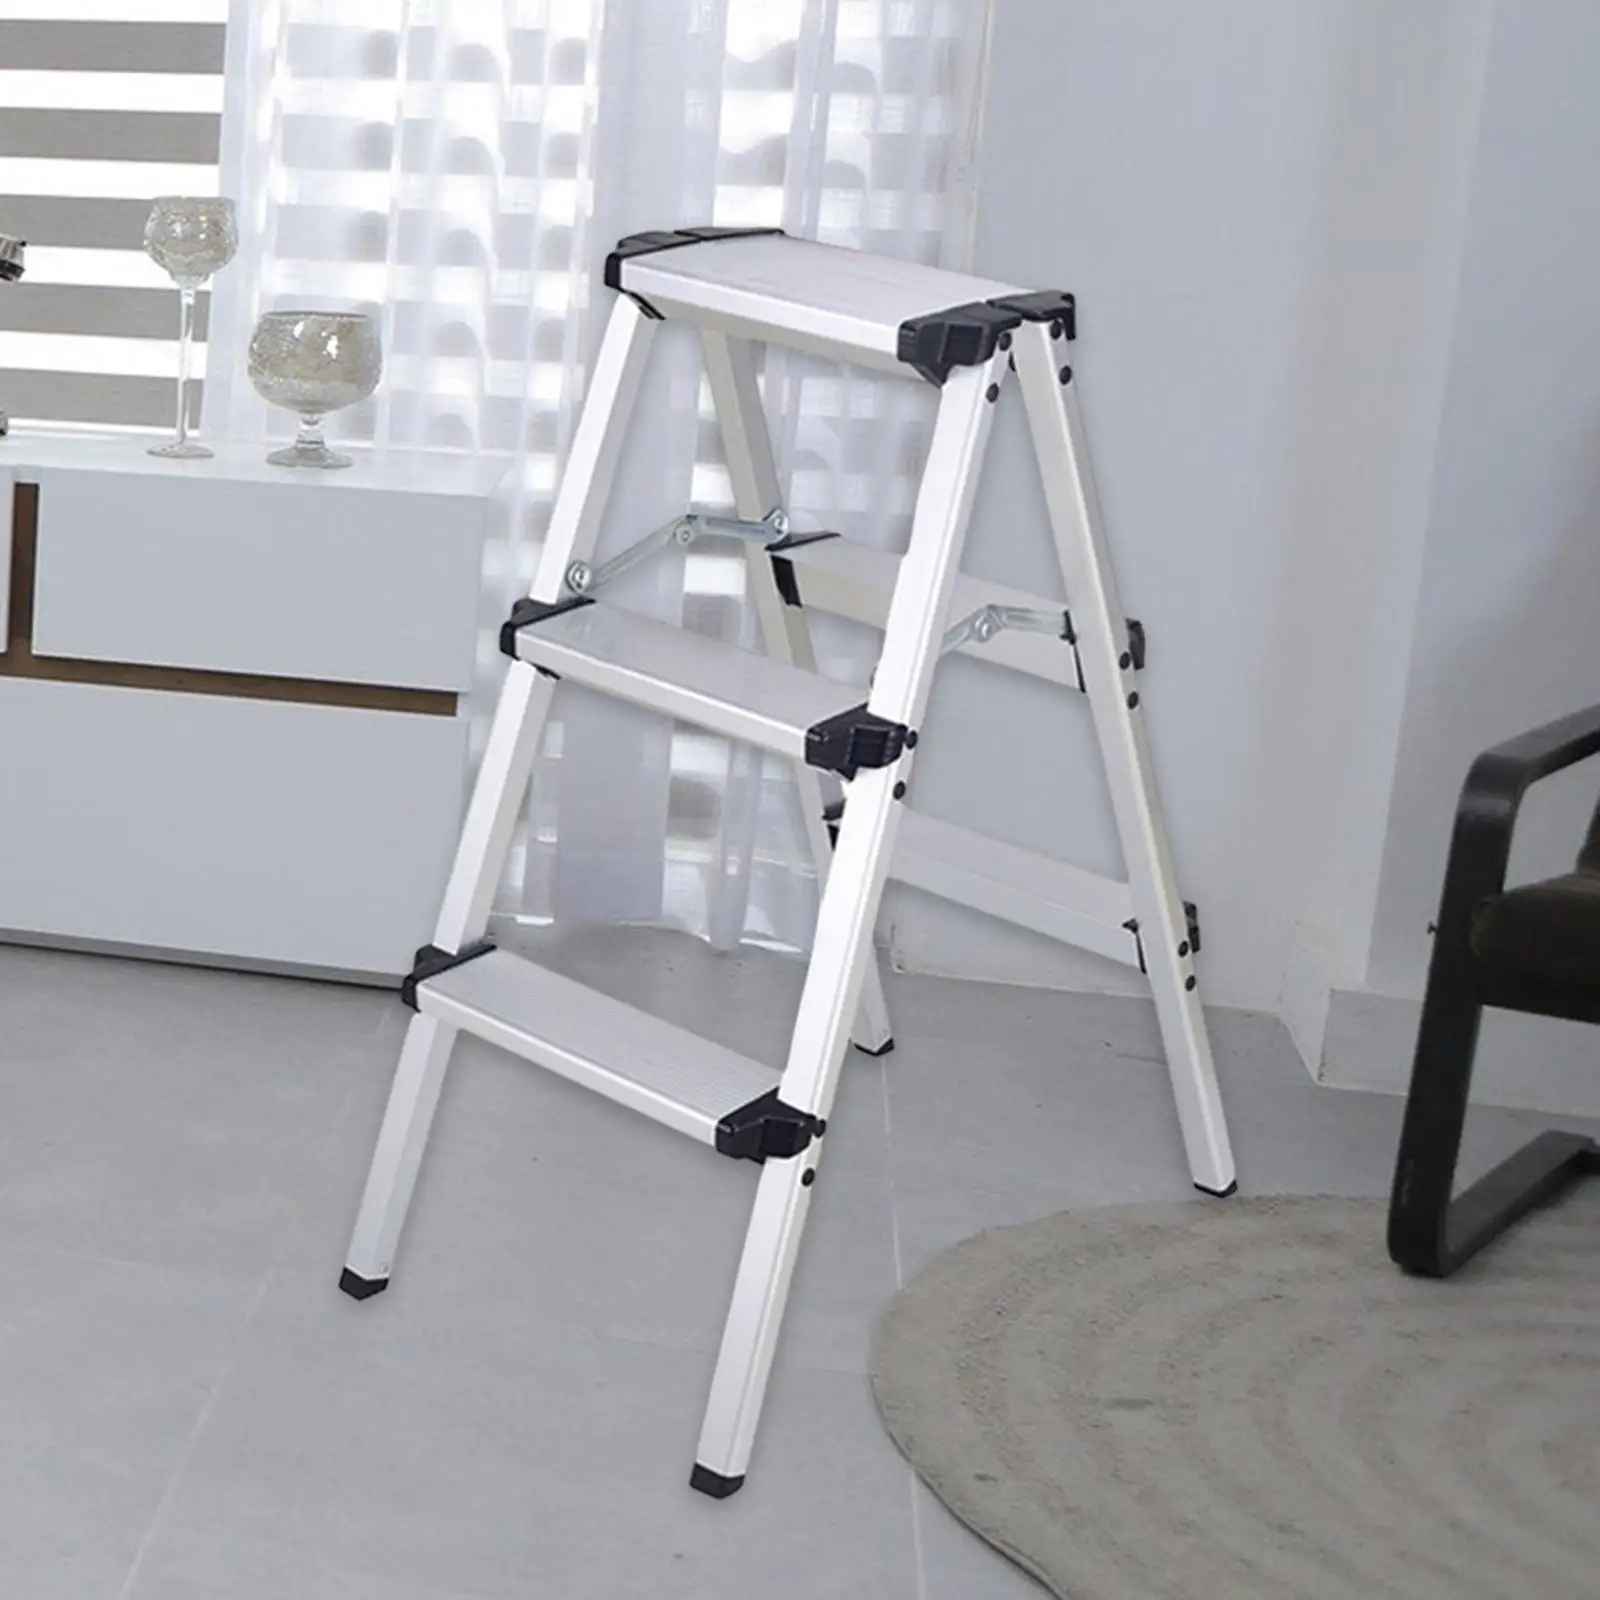 3 Step Herringbone Ladders Collapsible Aluminum Alloy for Office Home Pantry